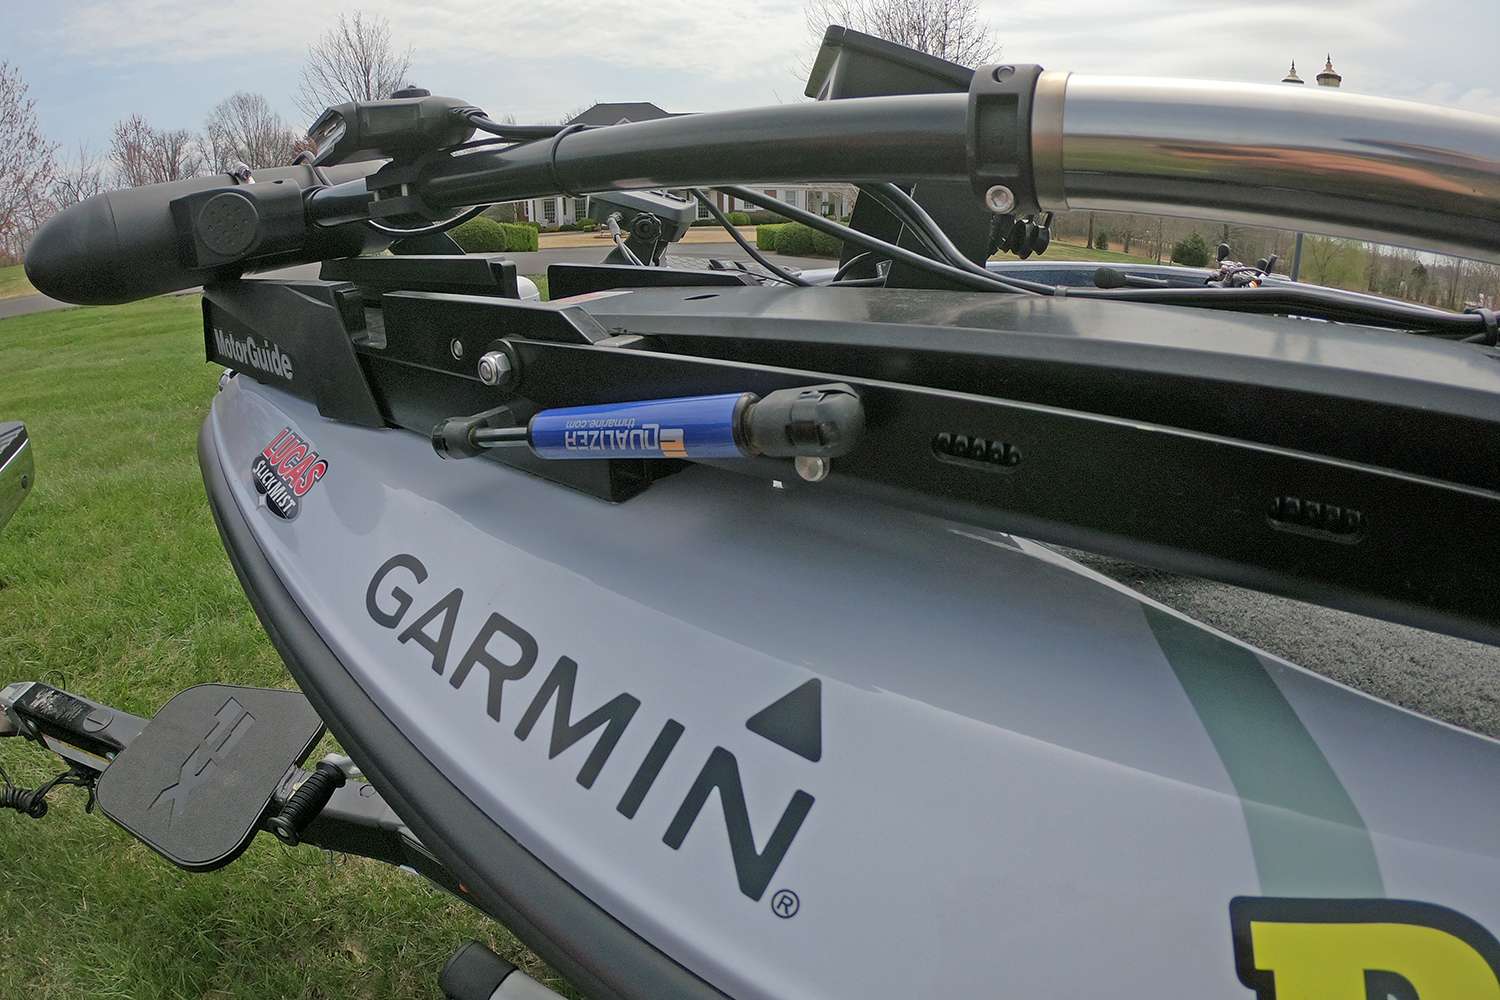 His trolling motor is rigged with several accessories, including a TH Marine Equalizer Trolling Motor lift assist.